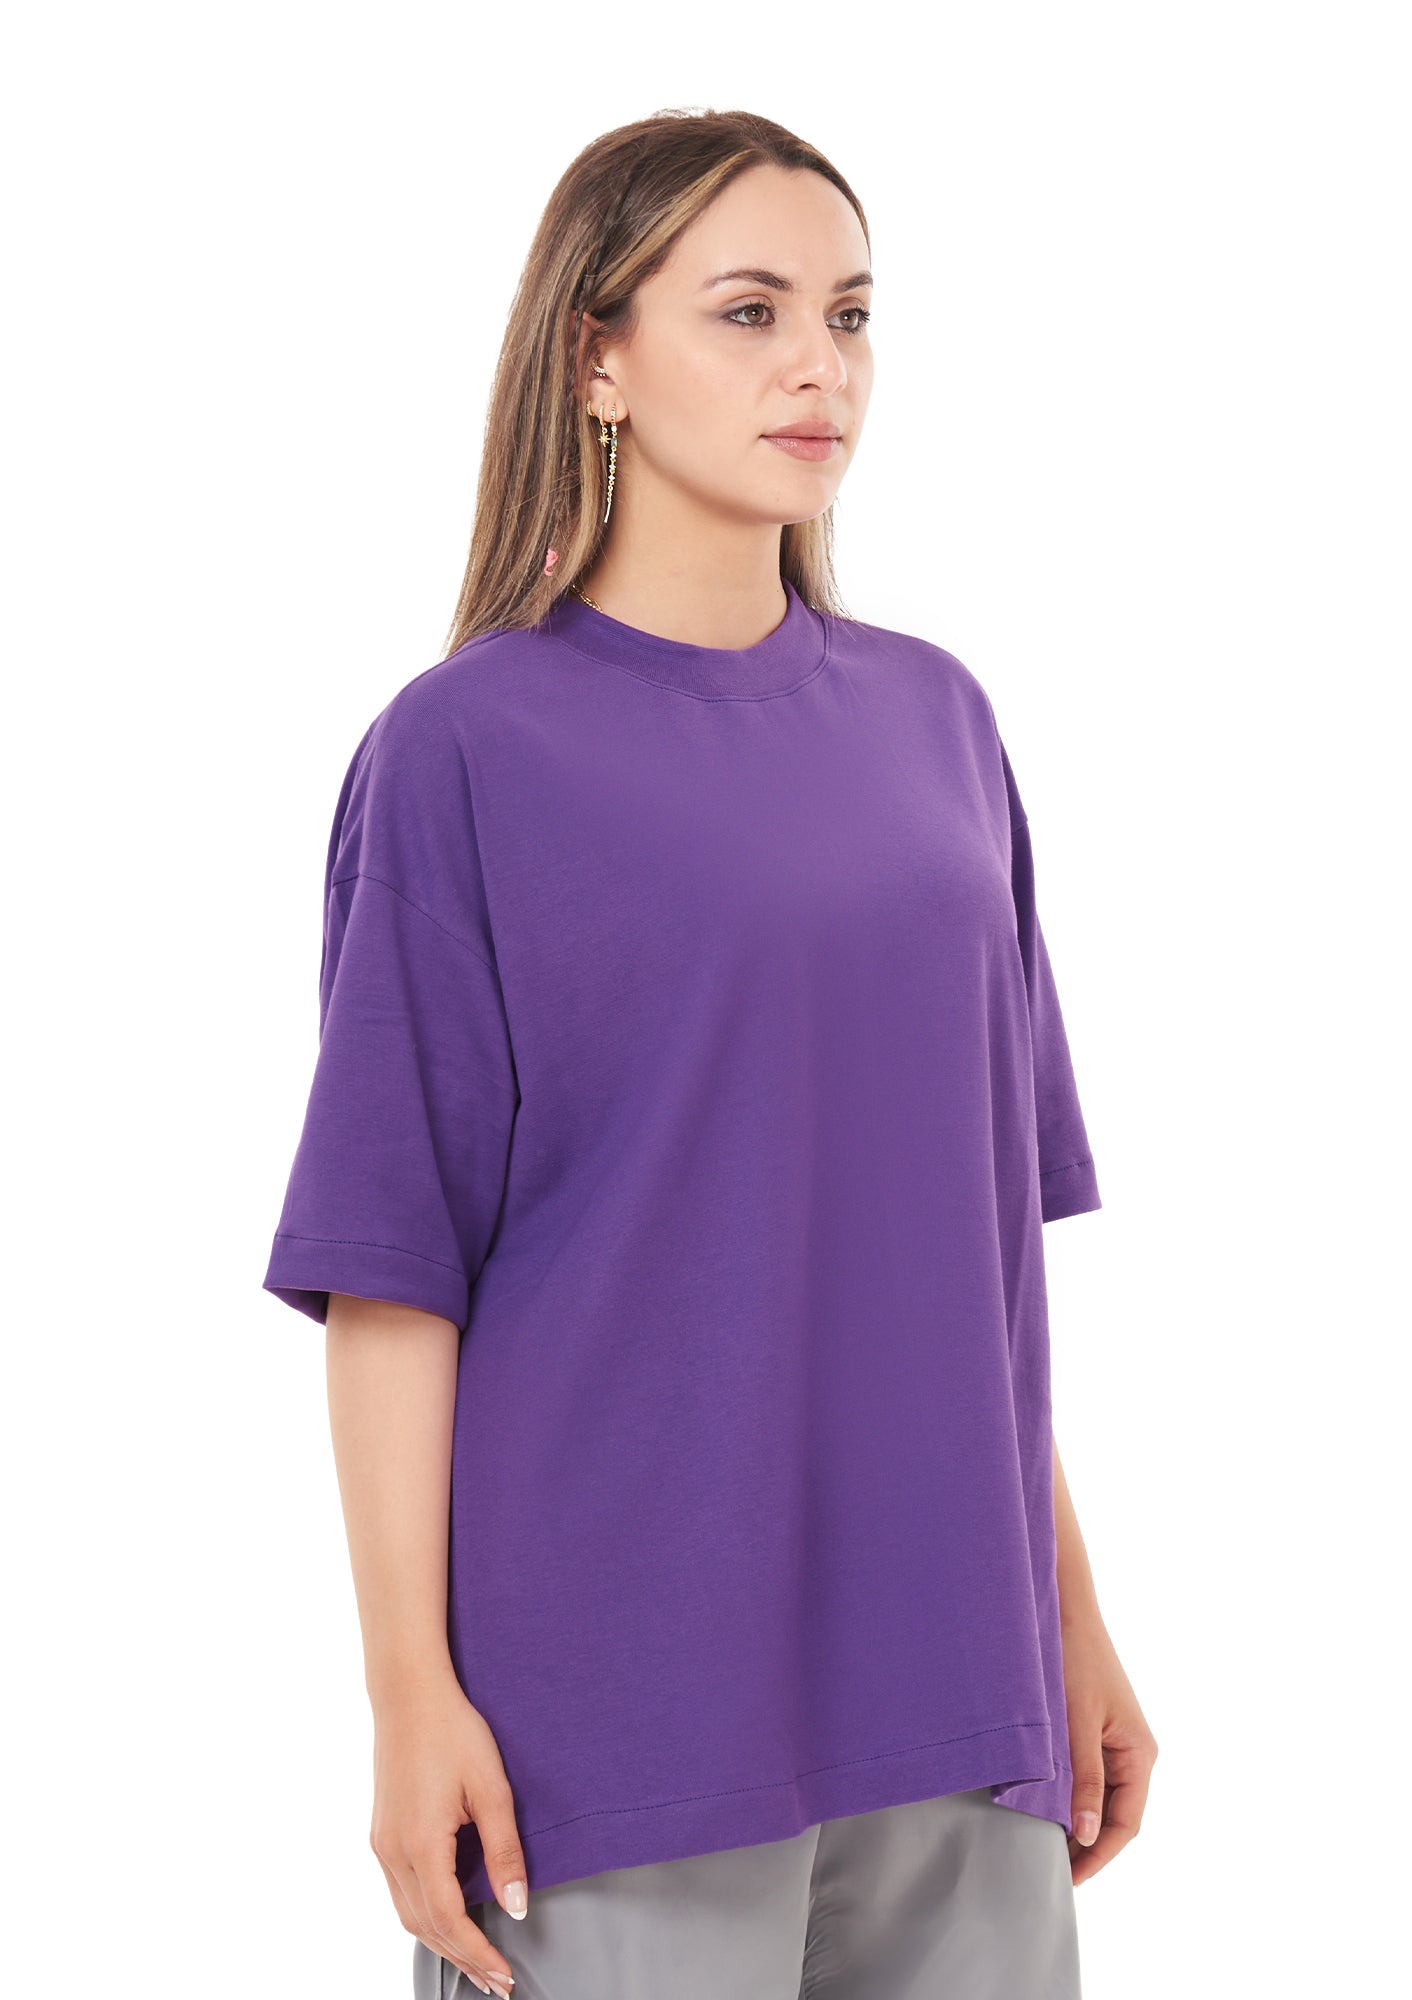 Butterfly Oversized printed Purple T-shirt for Her